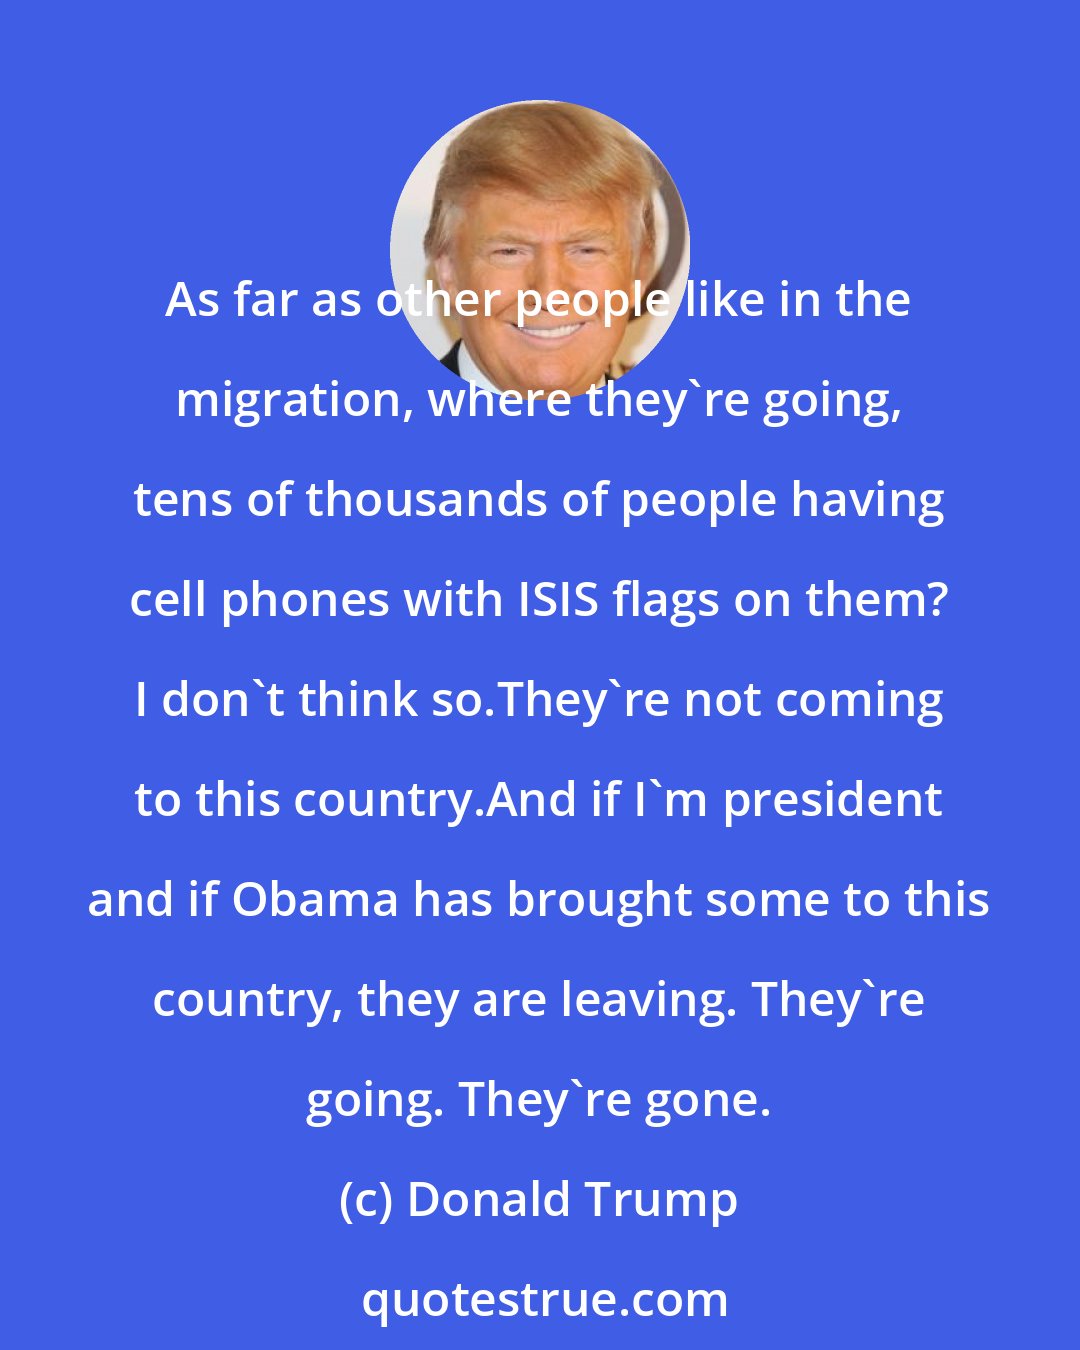 Donald Trump: As far as other people like in the migration, where they're going, tens of thousands of people having cell phones with ISIS flags on them? I don't think so.They're not coming to this country.And if I'm president and if Obama has brought some to this country, they are leaving. They're going. They're gone.